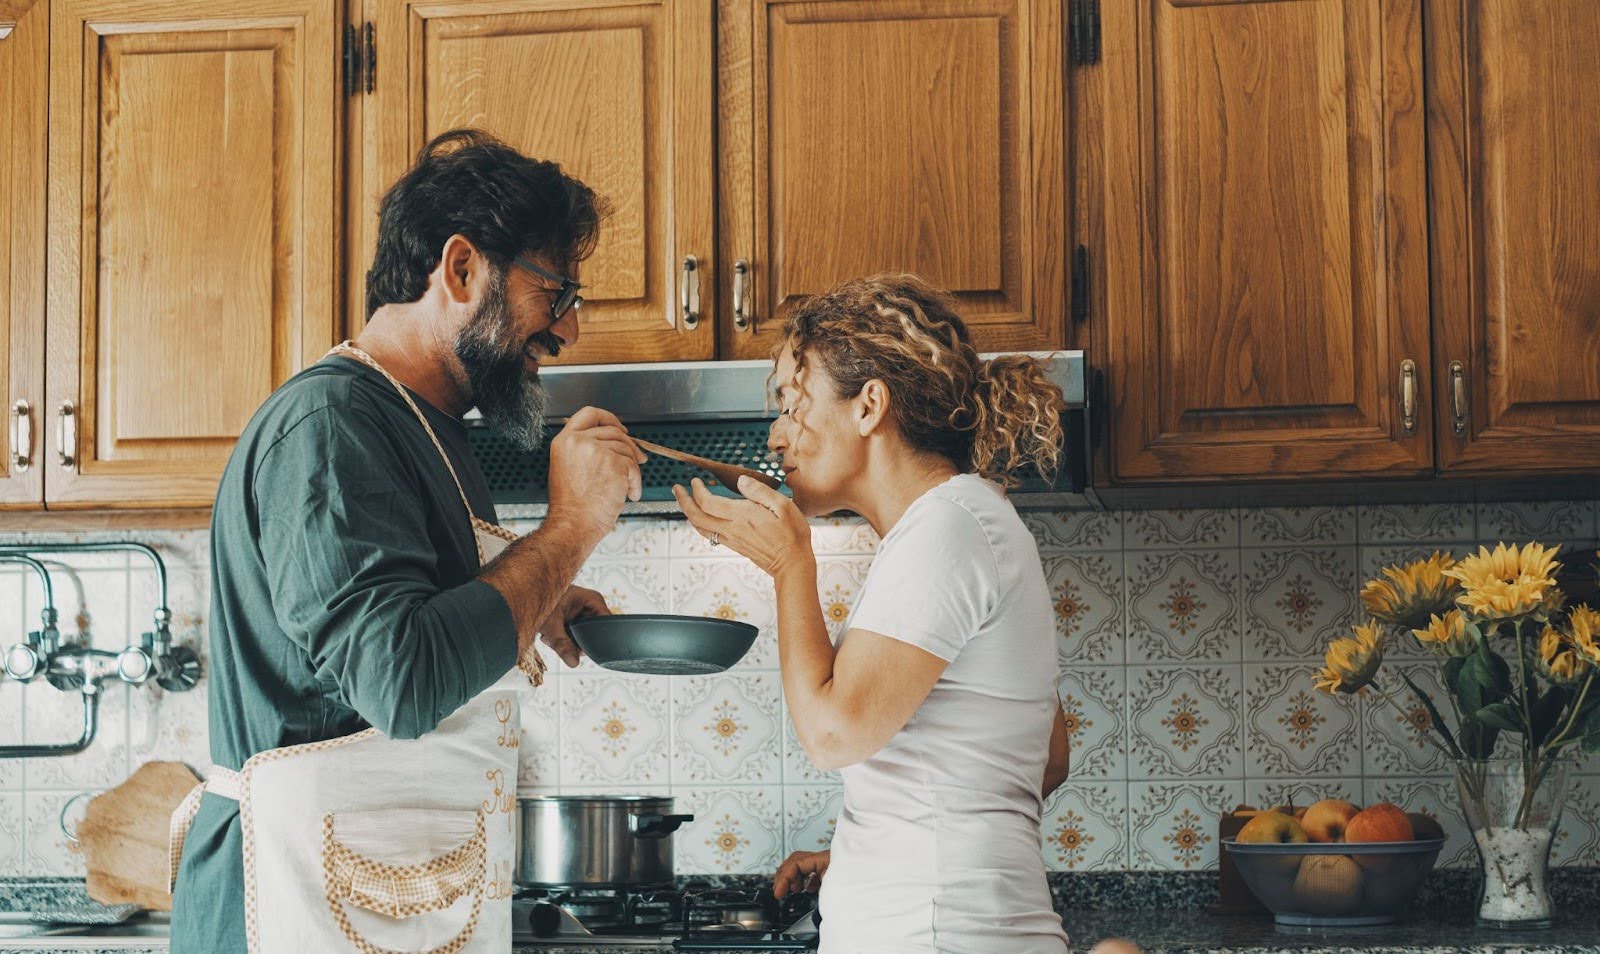 Couple laughing and cooking together in a kitchen